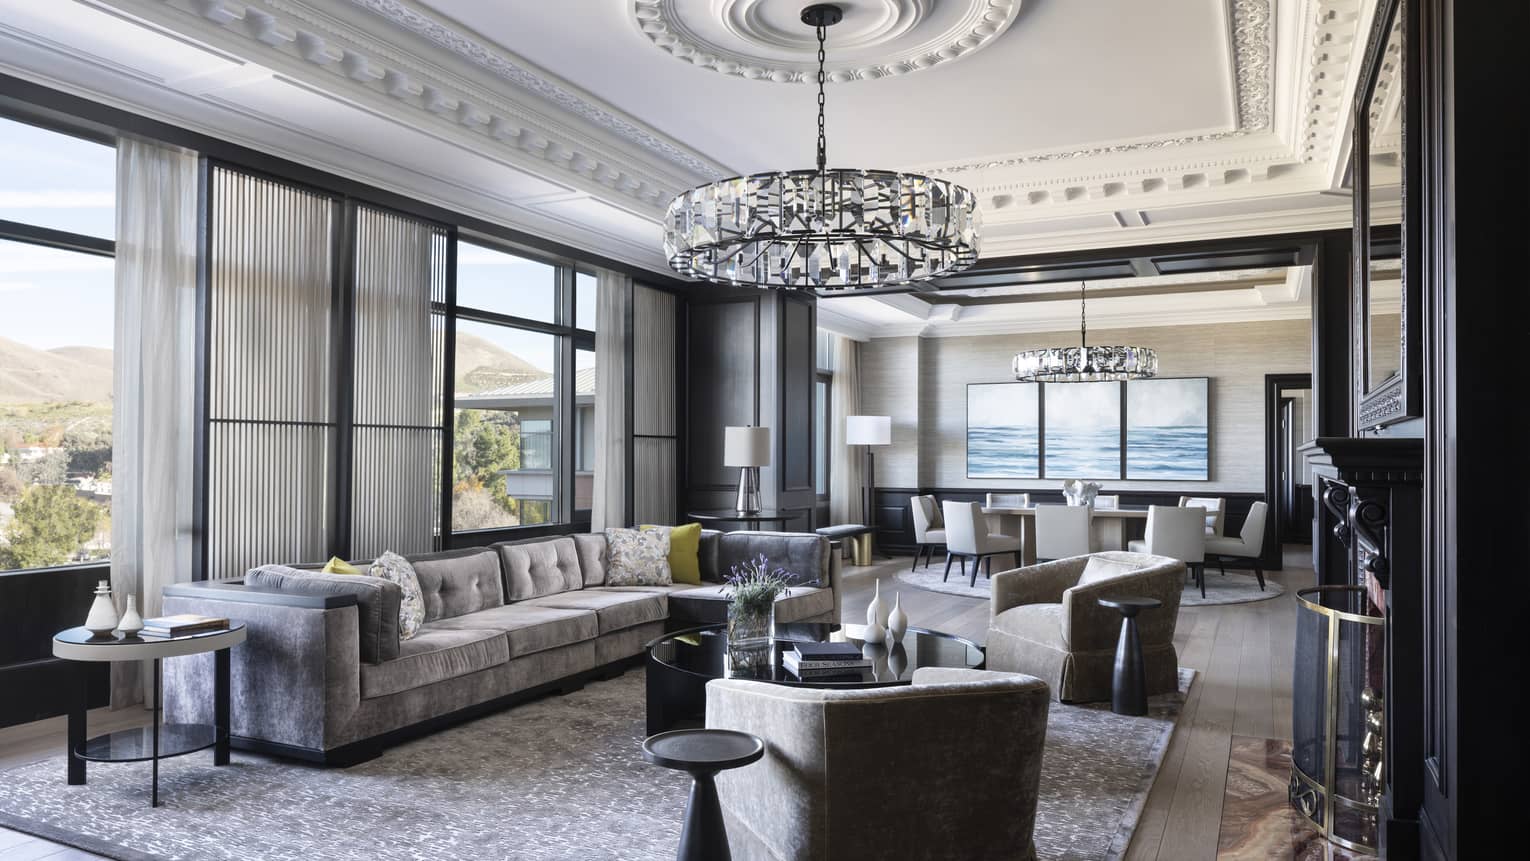 Presidential Suite featuring a chic, grey, L-shaped sofa under a ceiling that boasts elaborate crown molding and a crystal chandelier